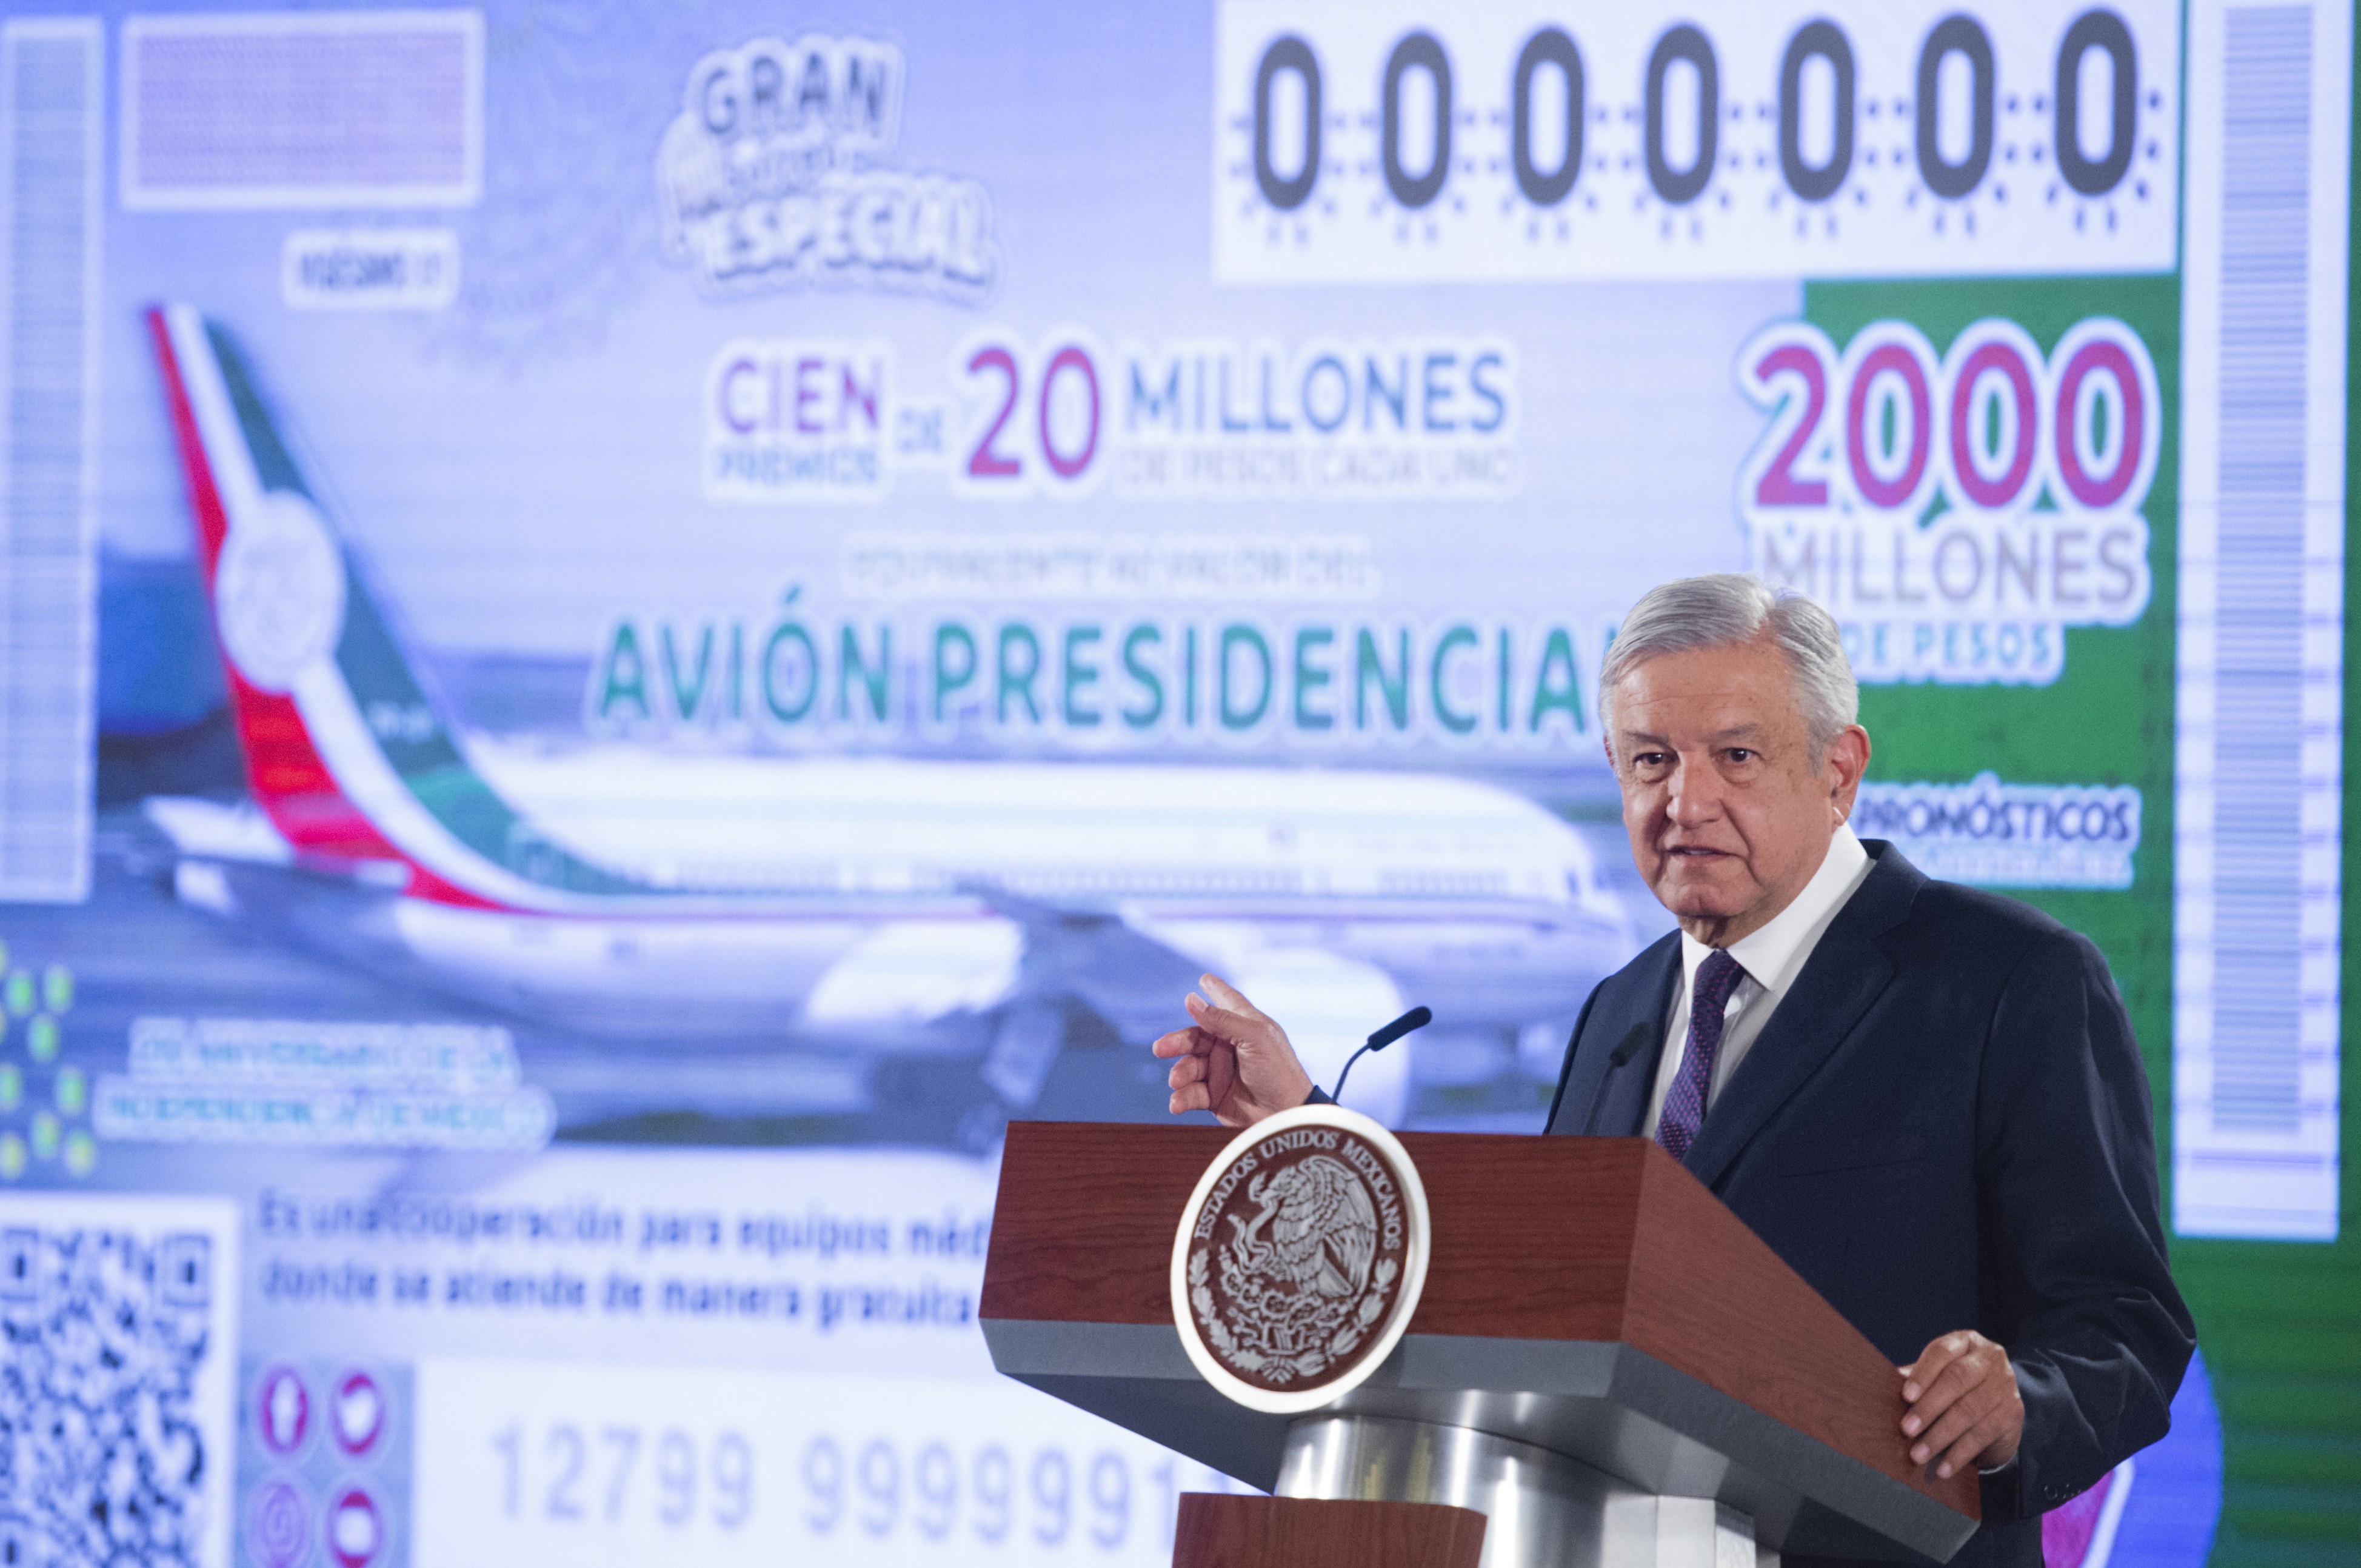 Mexico’s President Andres Manuel Lopez Obrador stands in front of an image of a raffle ticket featuring the presidential plane at the National Palace in Mexico City on Friday. Photo: Mexico's Presidential Press Office via AP